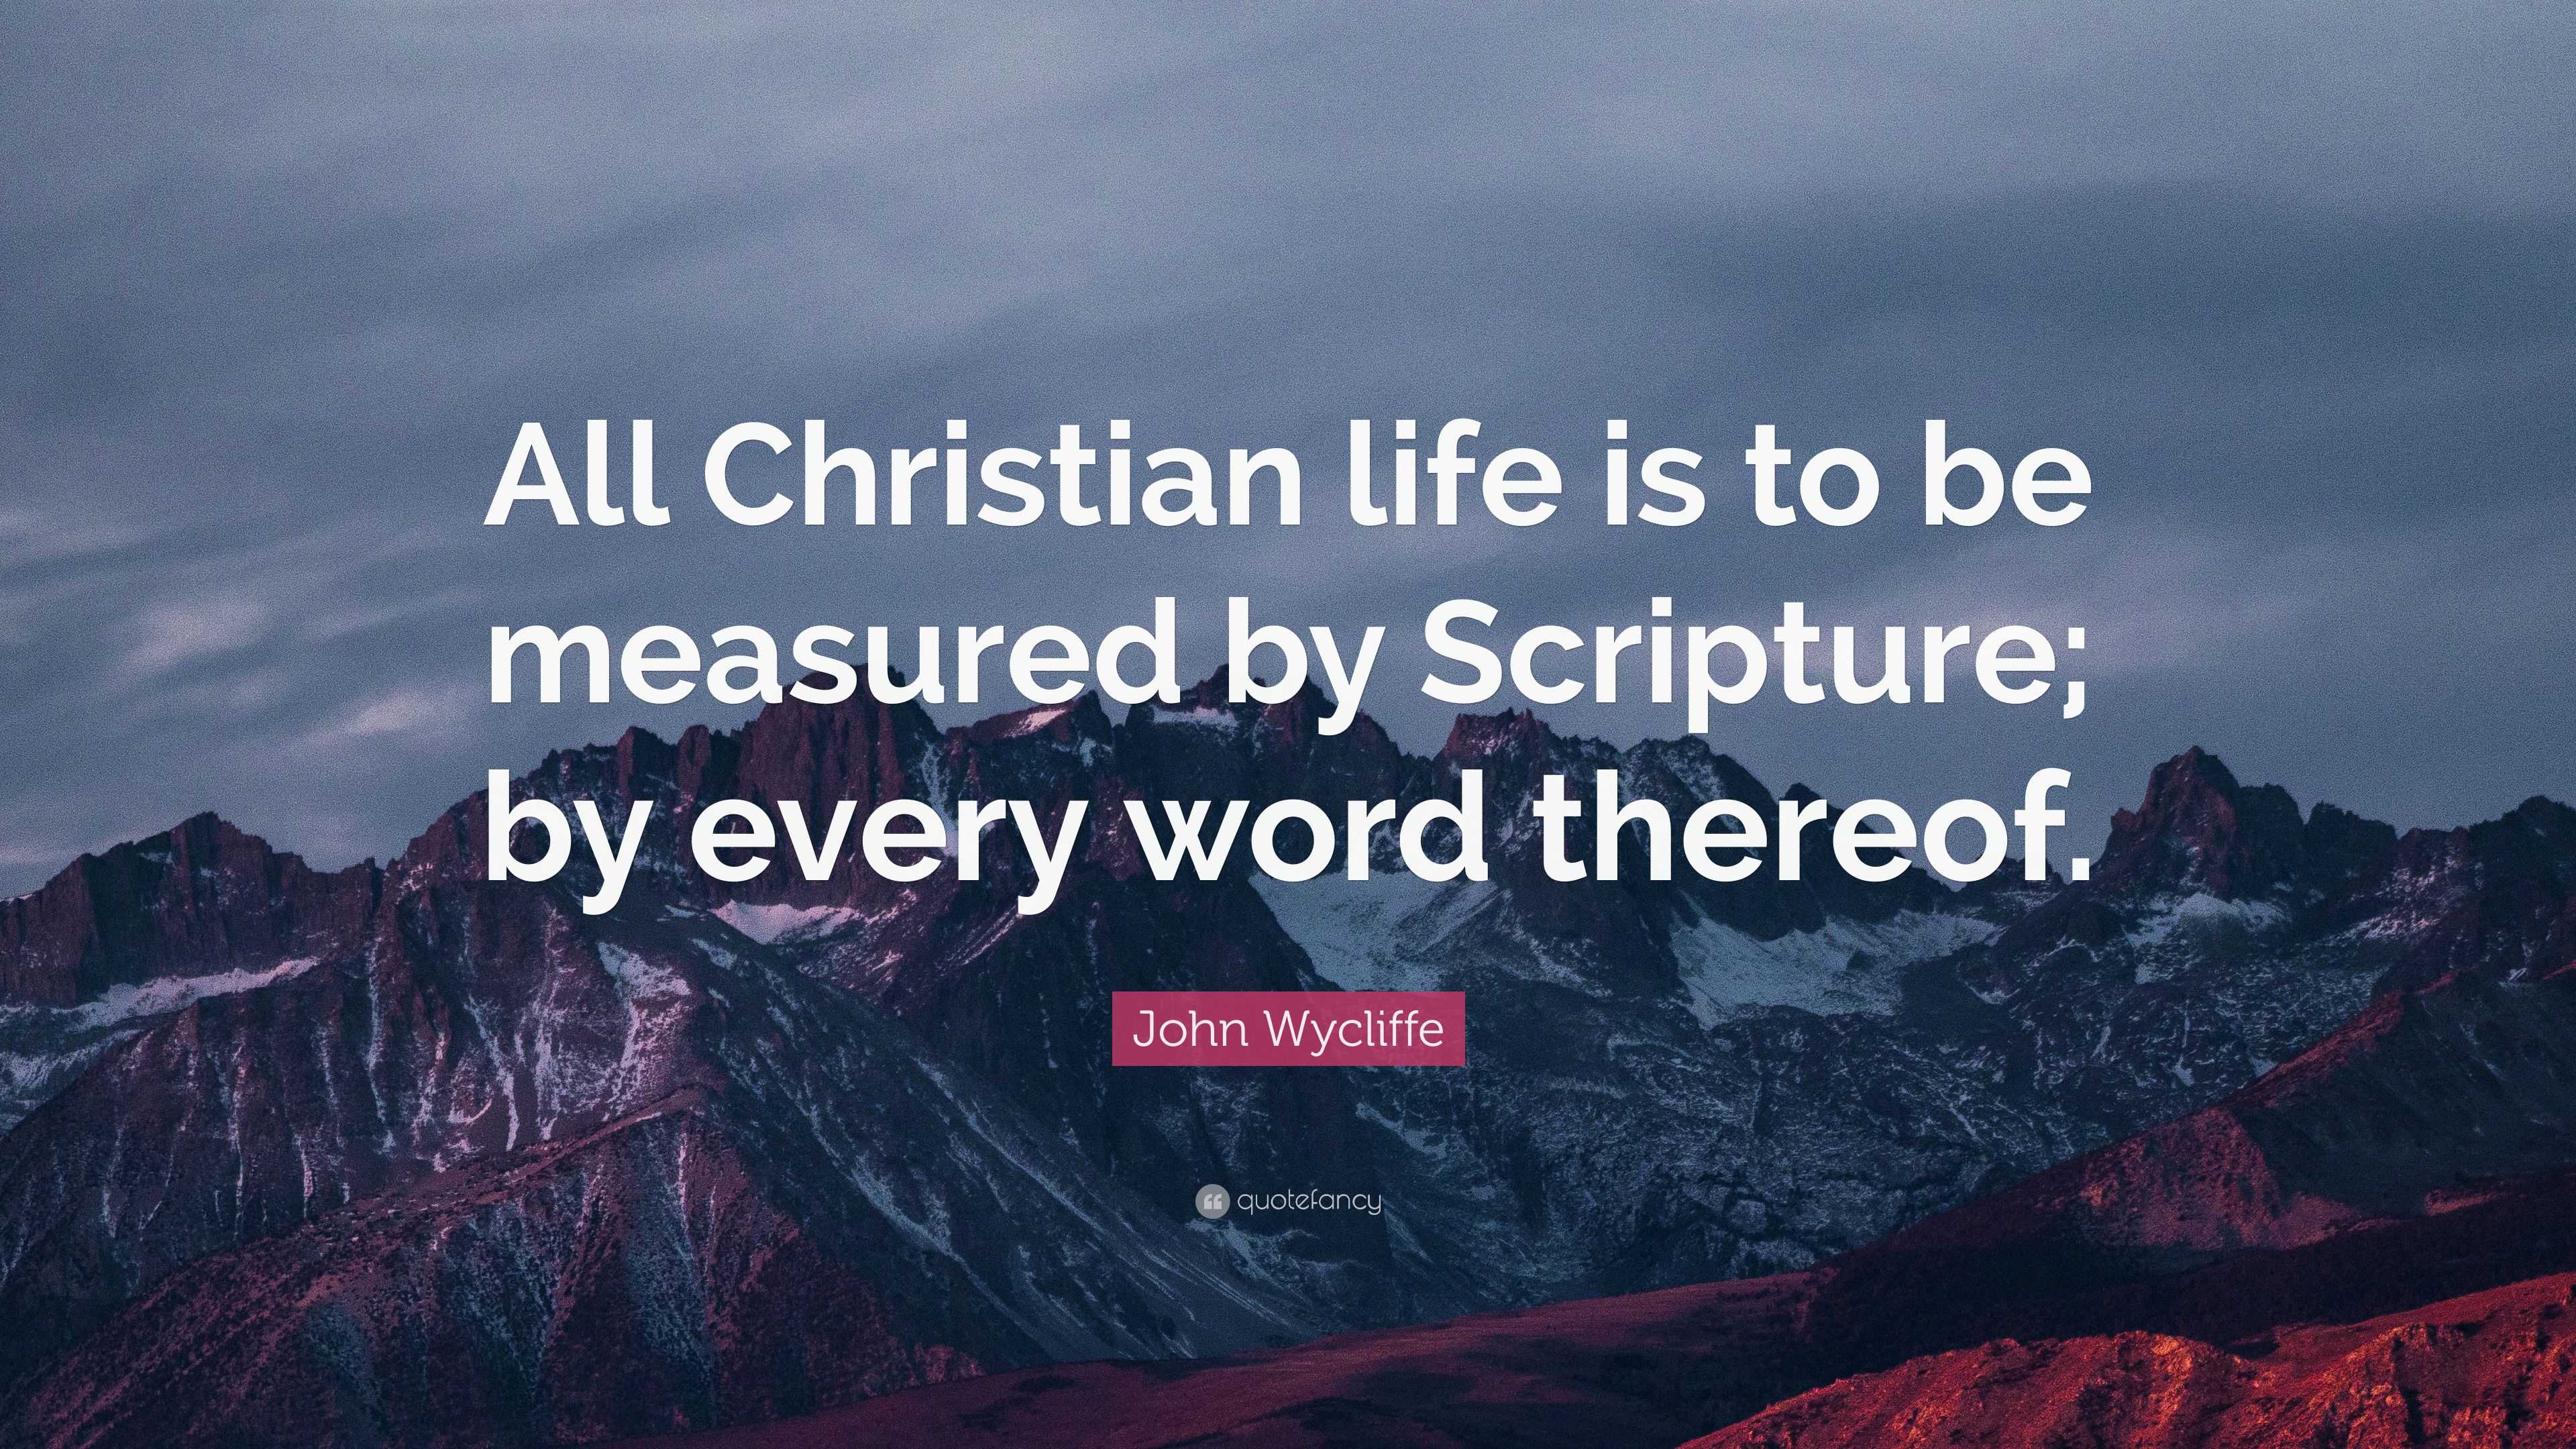 John Wycliffe Quote “All Christian life is to be measured by Scripture